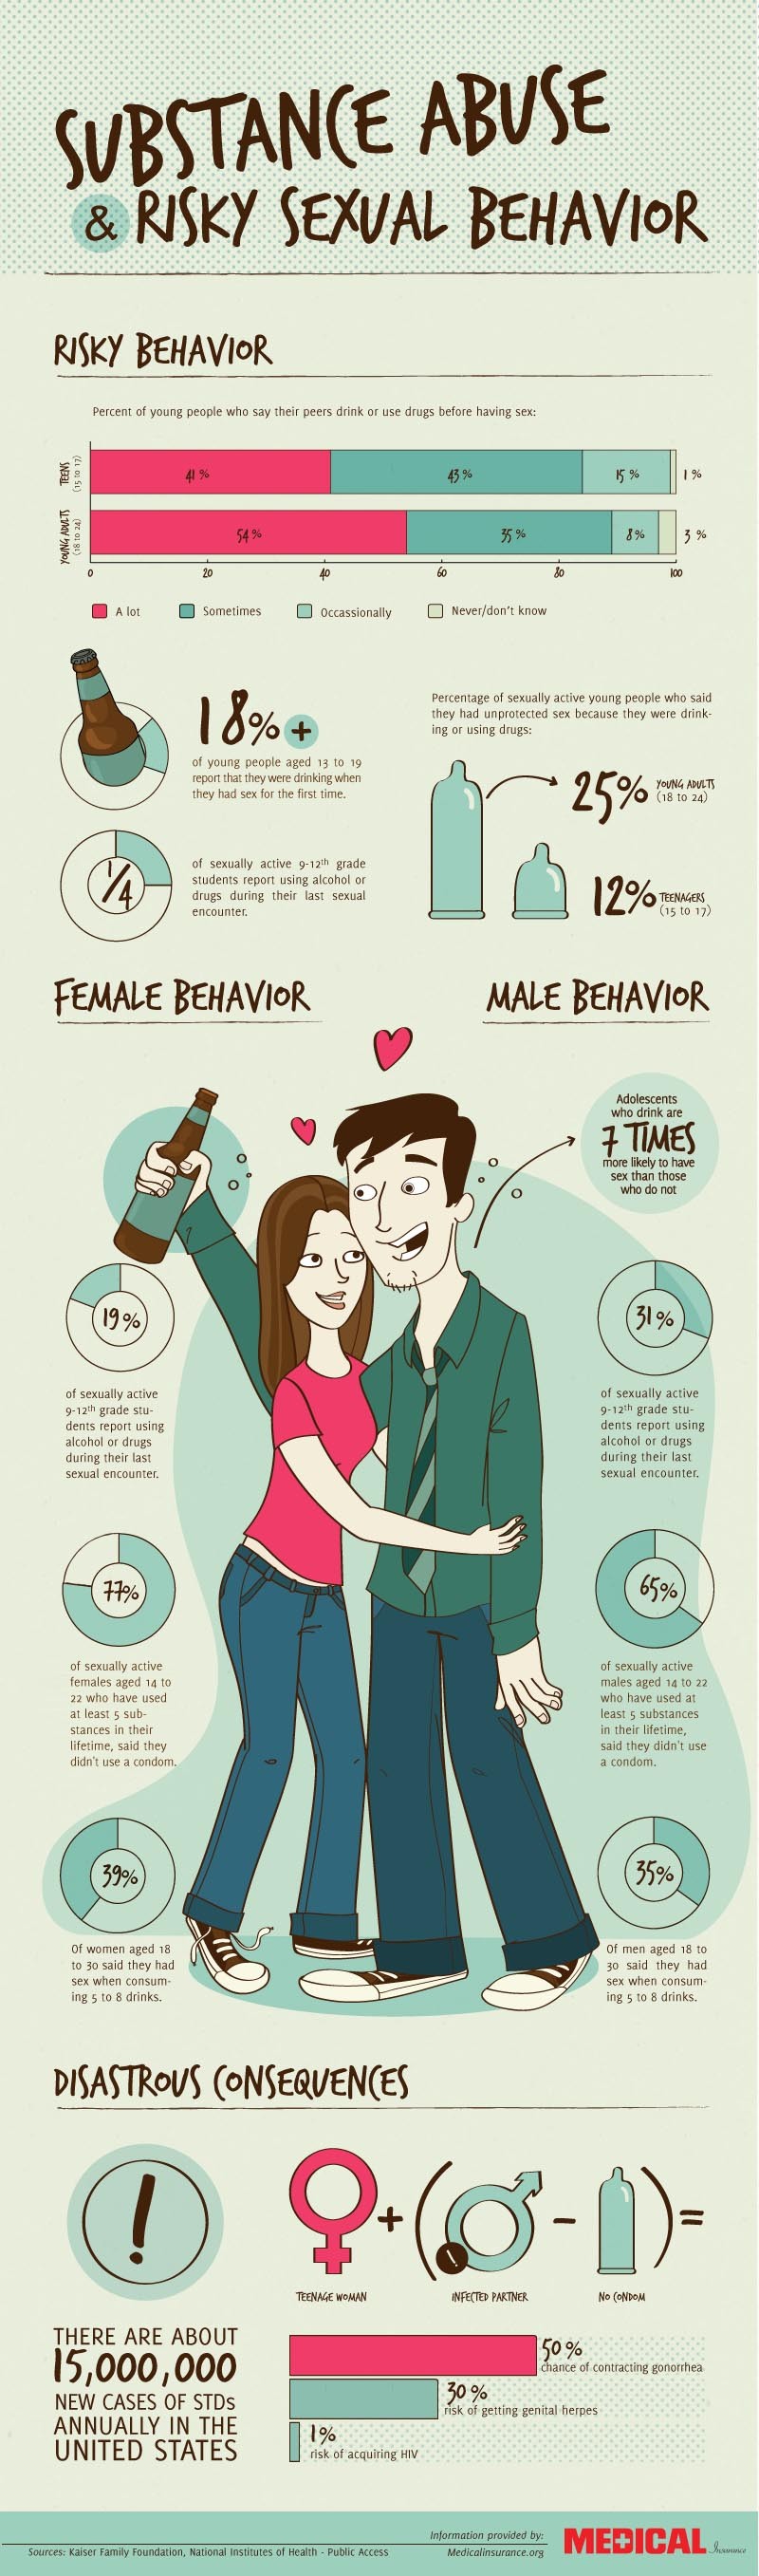 Substance Abuse & Risky Sexual Behavior [Infographic]